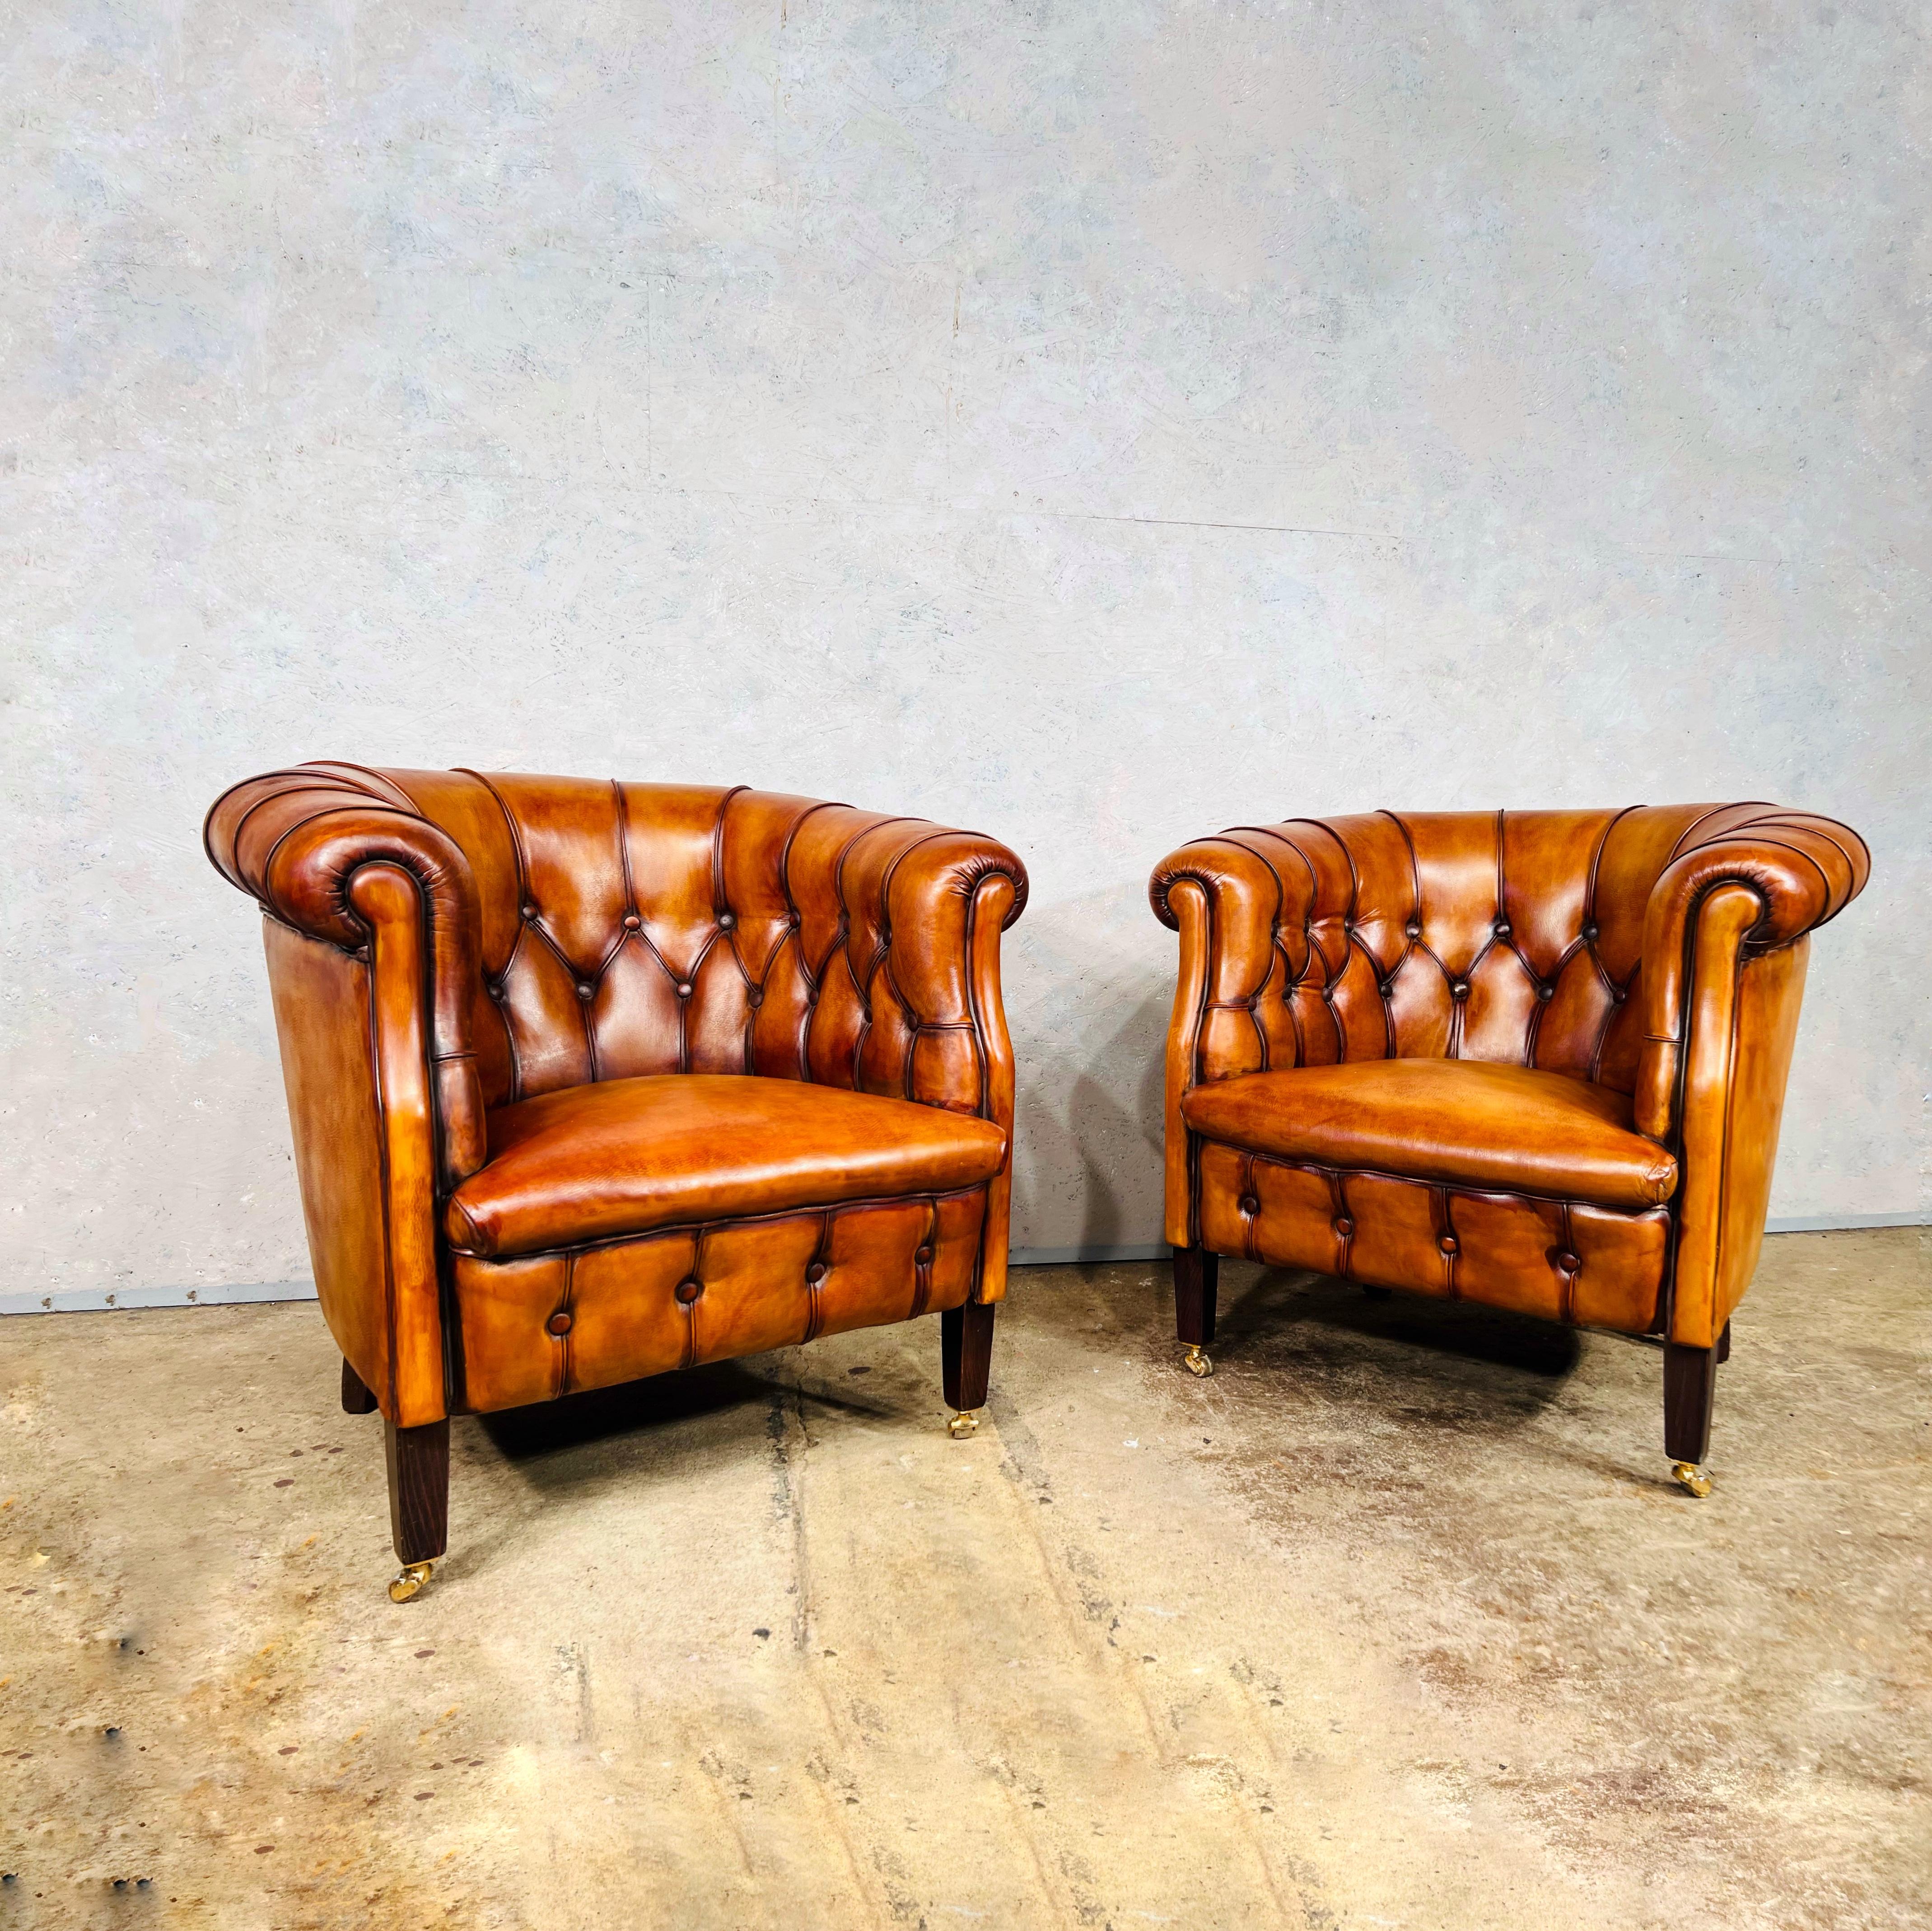 Great pair of vintage light tan leather tub chairs 
They have great proportions, neat in size, very comfortable to sit in.

They have an exceptional tan colour with a beautiful patina and finish.

Exceptional Quality chairs.

Would add a